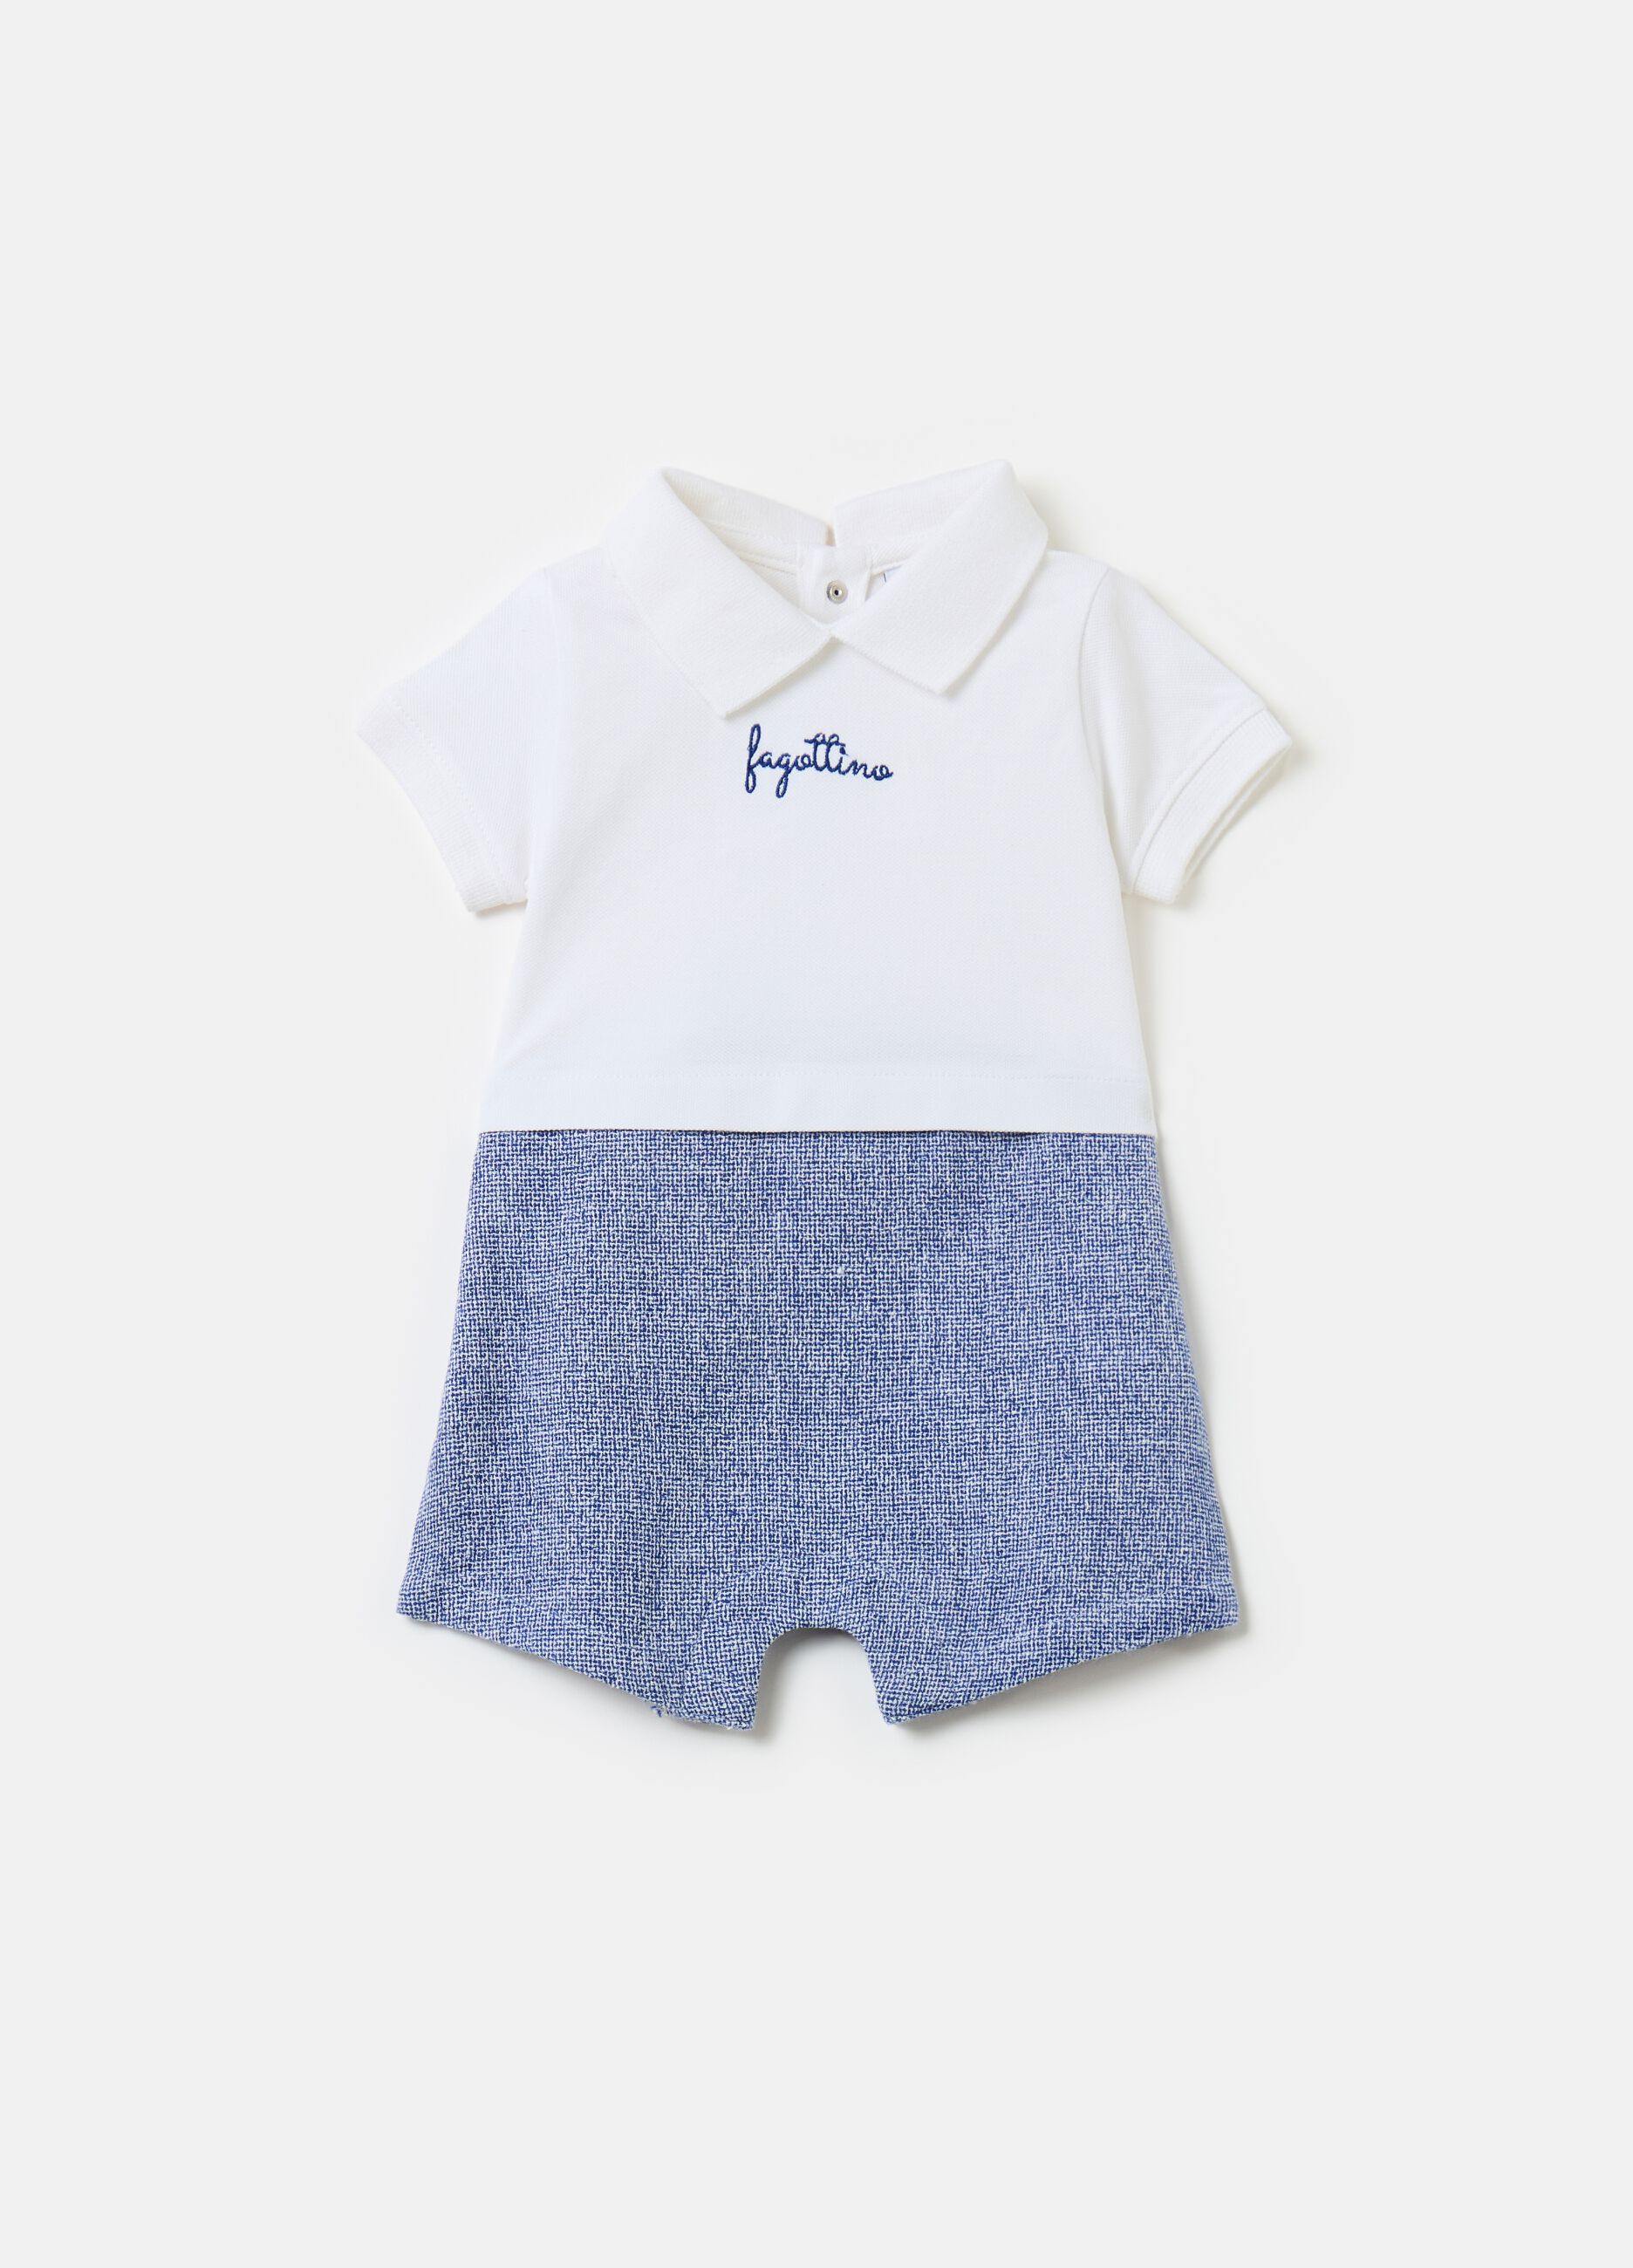 Cotton and linen romper suit with embroidery